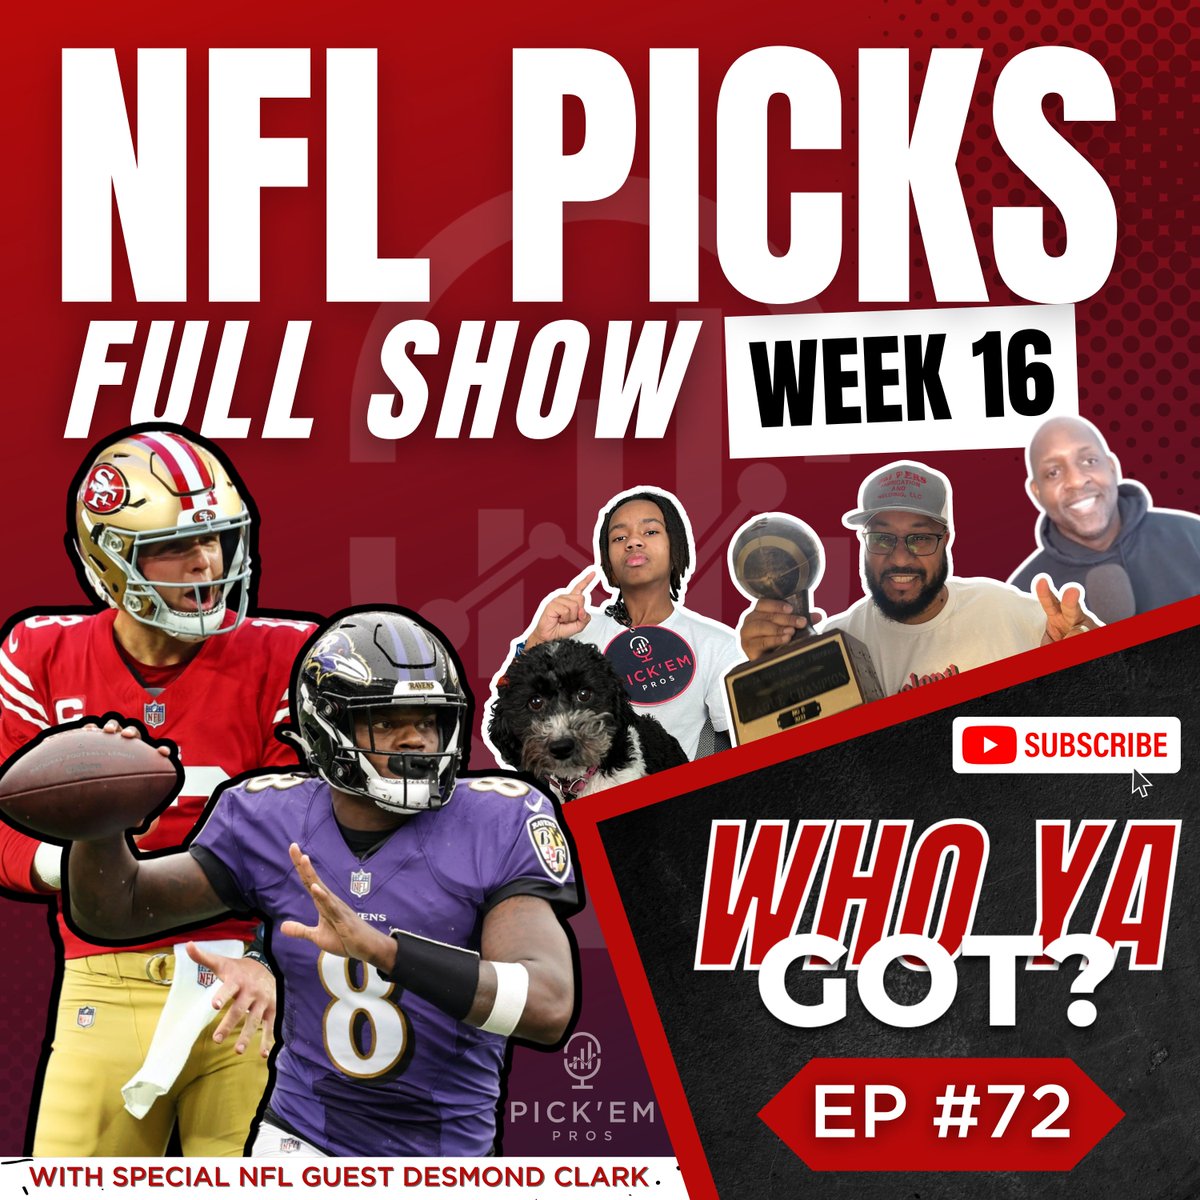 Our #NFL Week 16 Picks are now live in EP 72 of #WhoYaGot💥  Diego's charity is rolling in the 💰 with the 4 wins back-to-back!
Watch NOW📲 youtu.be/3enLrLufU-M?si…

#PickemPros #NFLSunday #Charity #GiveBack #SportsPodcast #SportsTalk #SportsPicks #NFLPicks #NFLPredictions